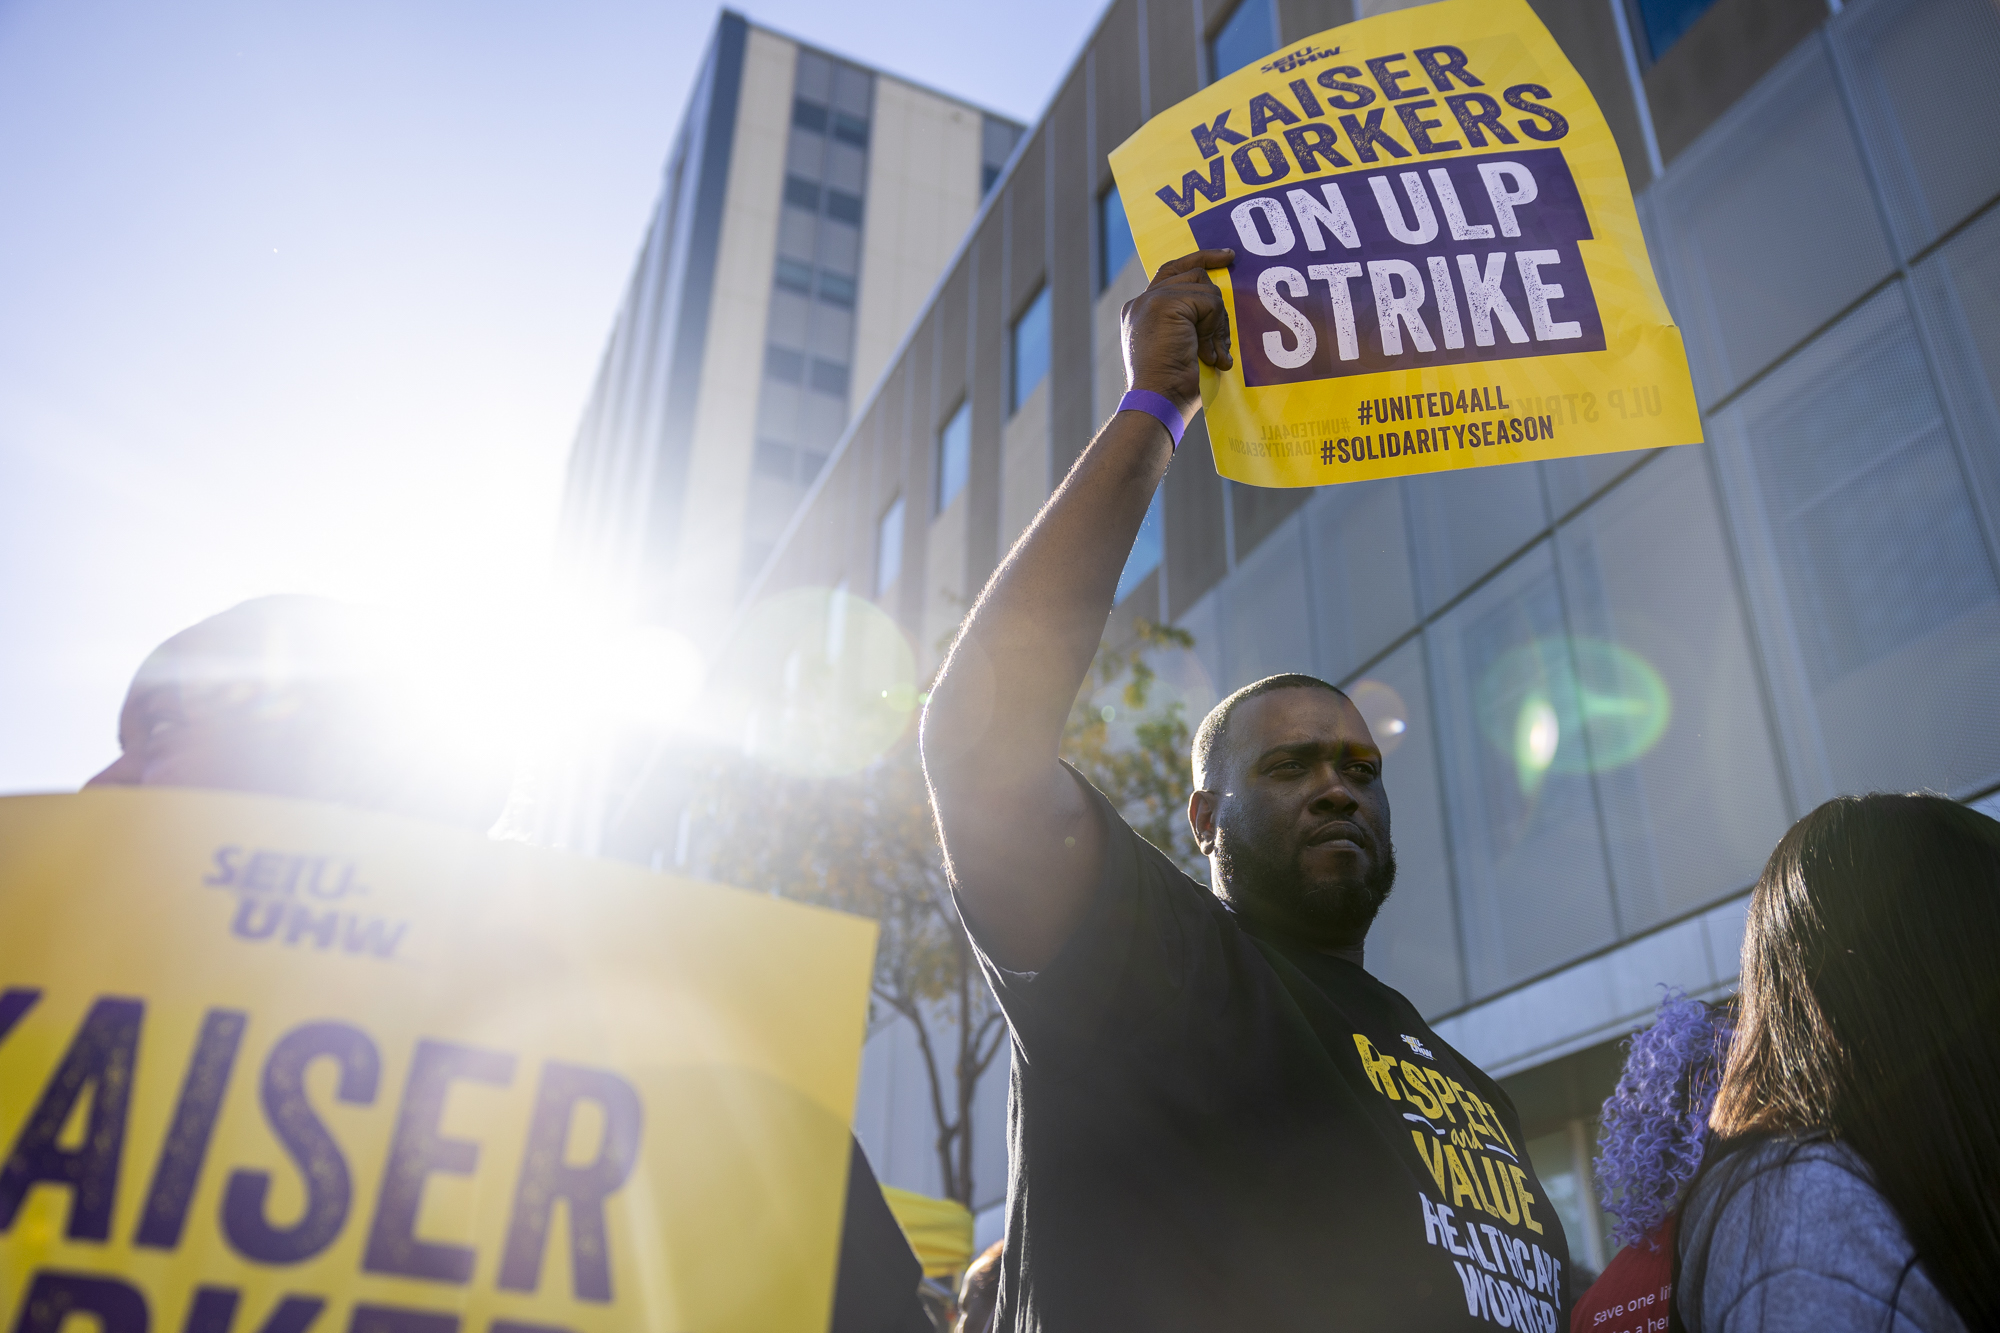 A person holds up a sign that reads "Kaiser Workers on ULP Strike."